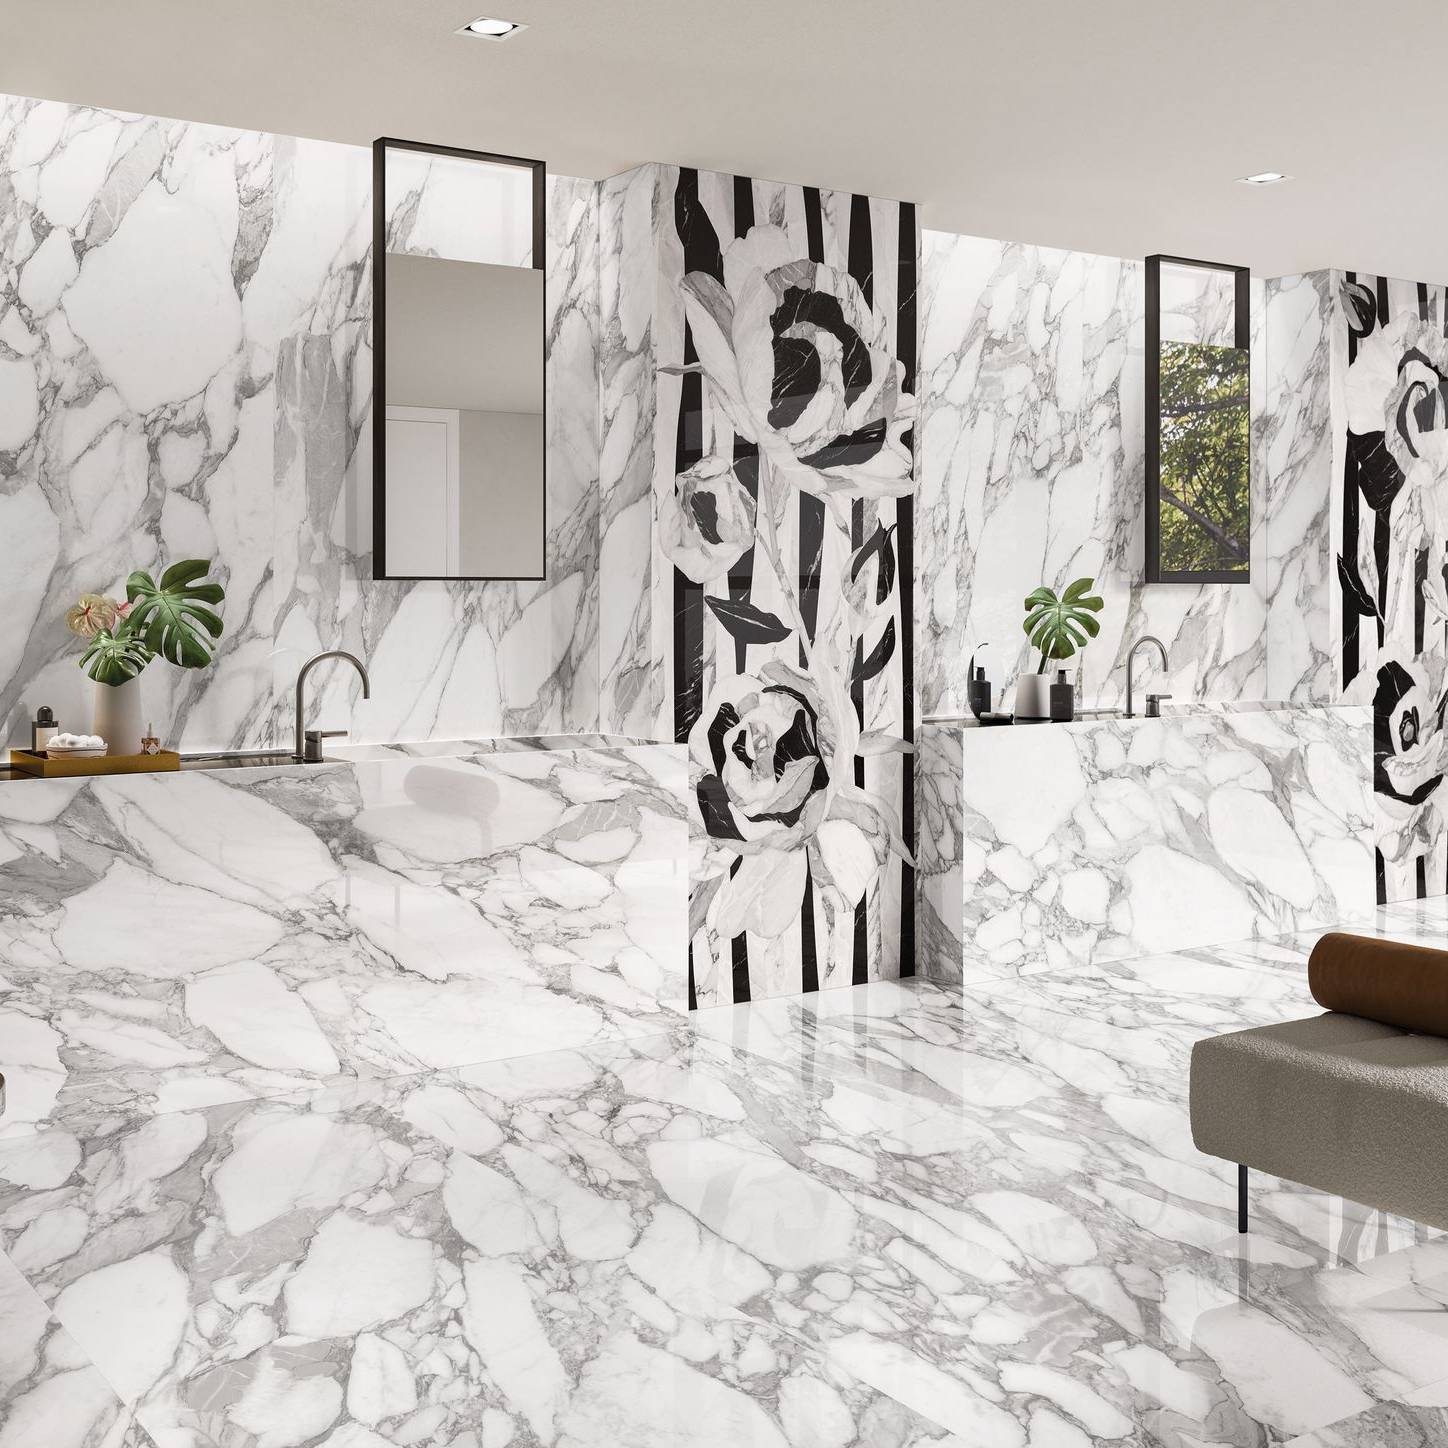 Selection 0 | Stones And More | Finest selection of Mosaics, Glass, Tile and Stone